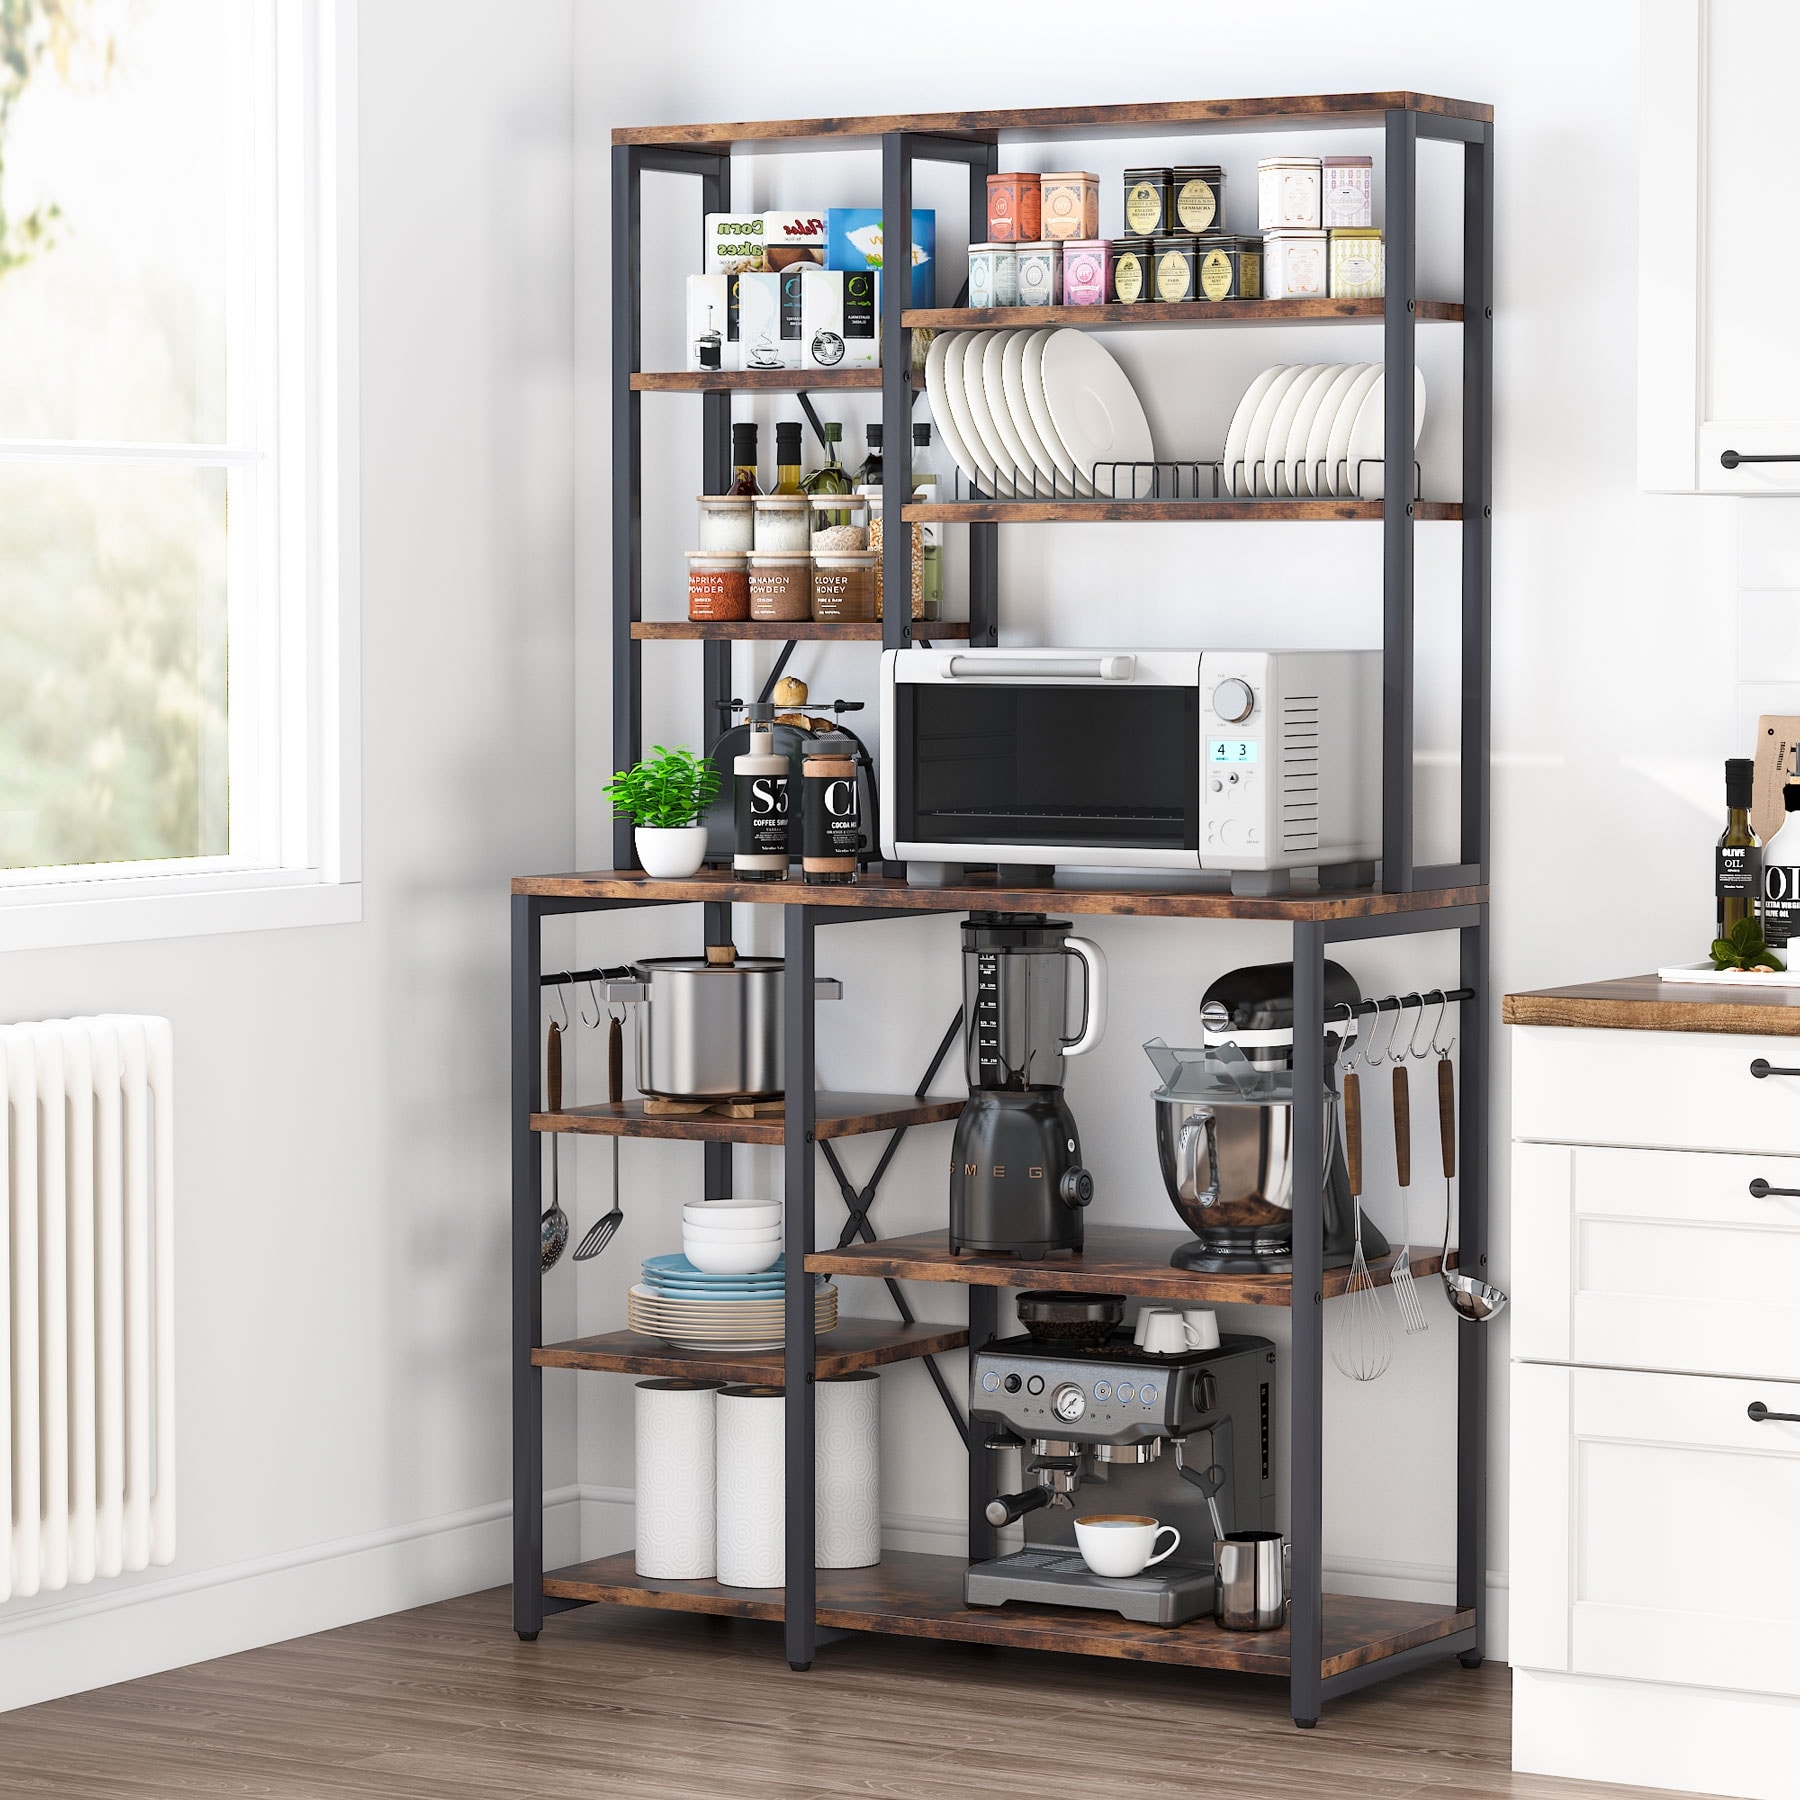 https://ak1.ostkcdn.com/images/products/is/images/direct/aaadaa5f161d6edf62d6bcde4dff9f8809ed79fa/Kitchen-Bakers-Rack-with-Hutch-and-Shelves%2C5-Tier-Kitchen-Utility-Storage-Shelf.jpg